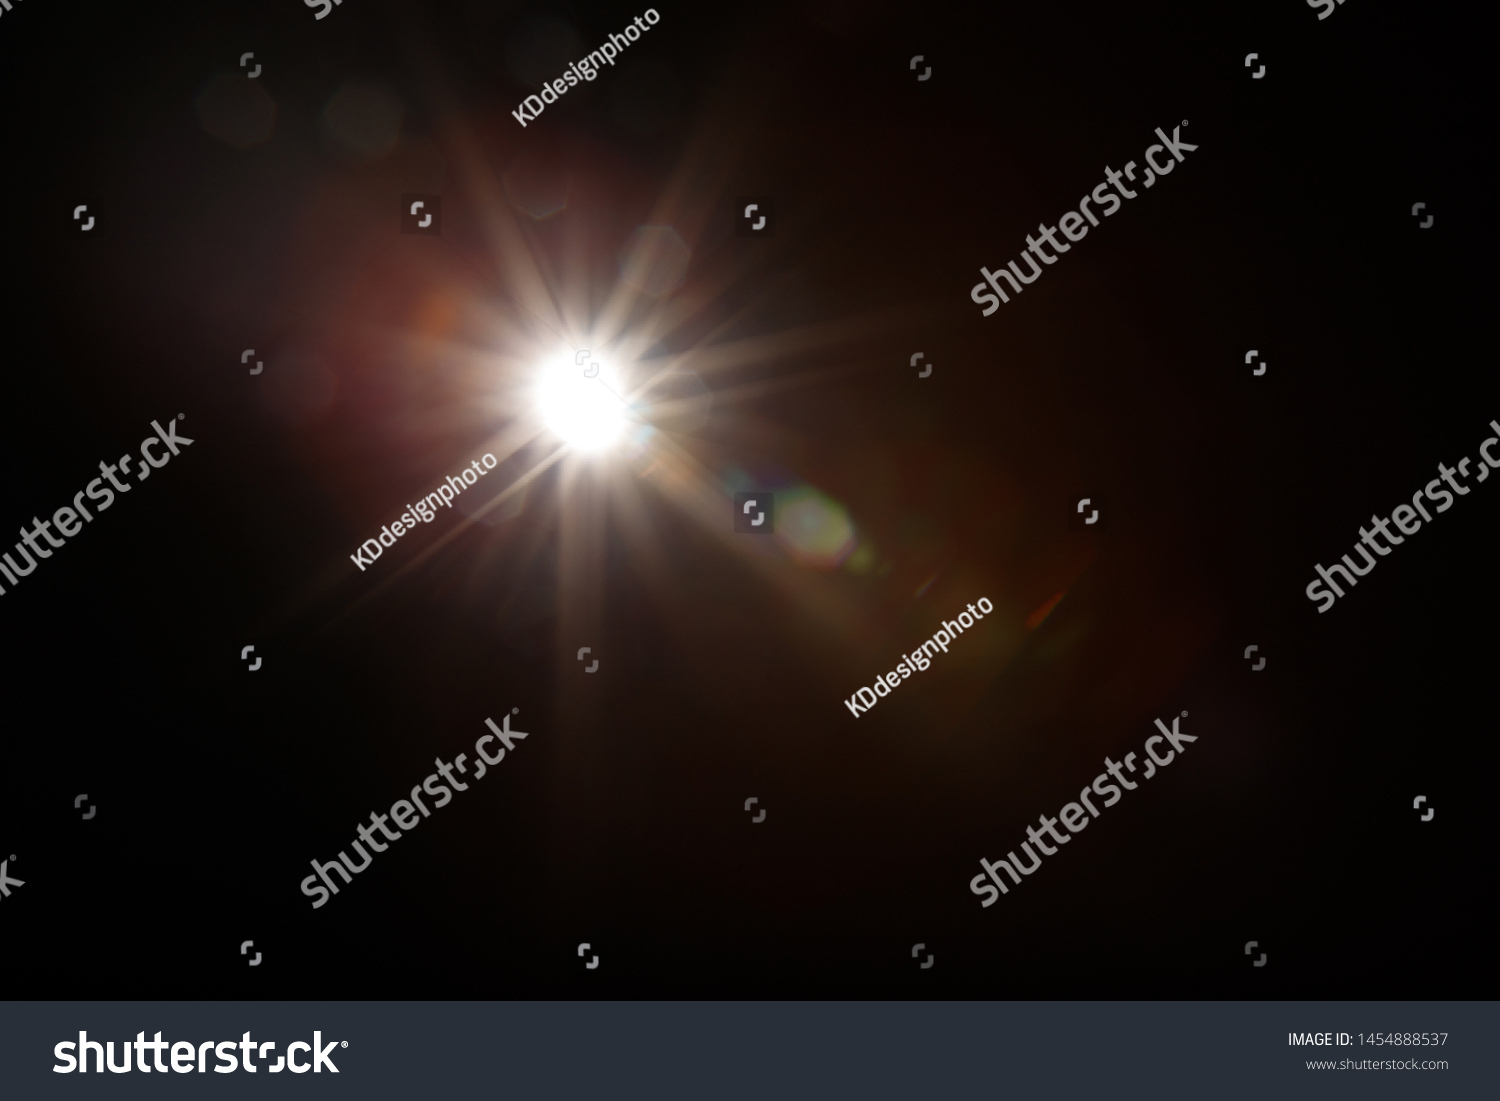 Lens Flare. Light over black background. Easy to add overlay or screen filter over photos. Abstract sun burst with digital lens flare background. Gleams rounded and hexagonal shapes, rainbow halo. #1454888537